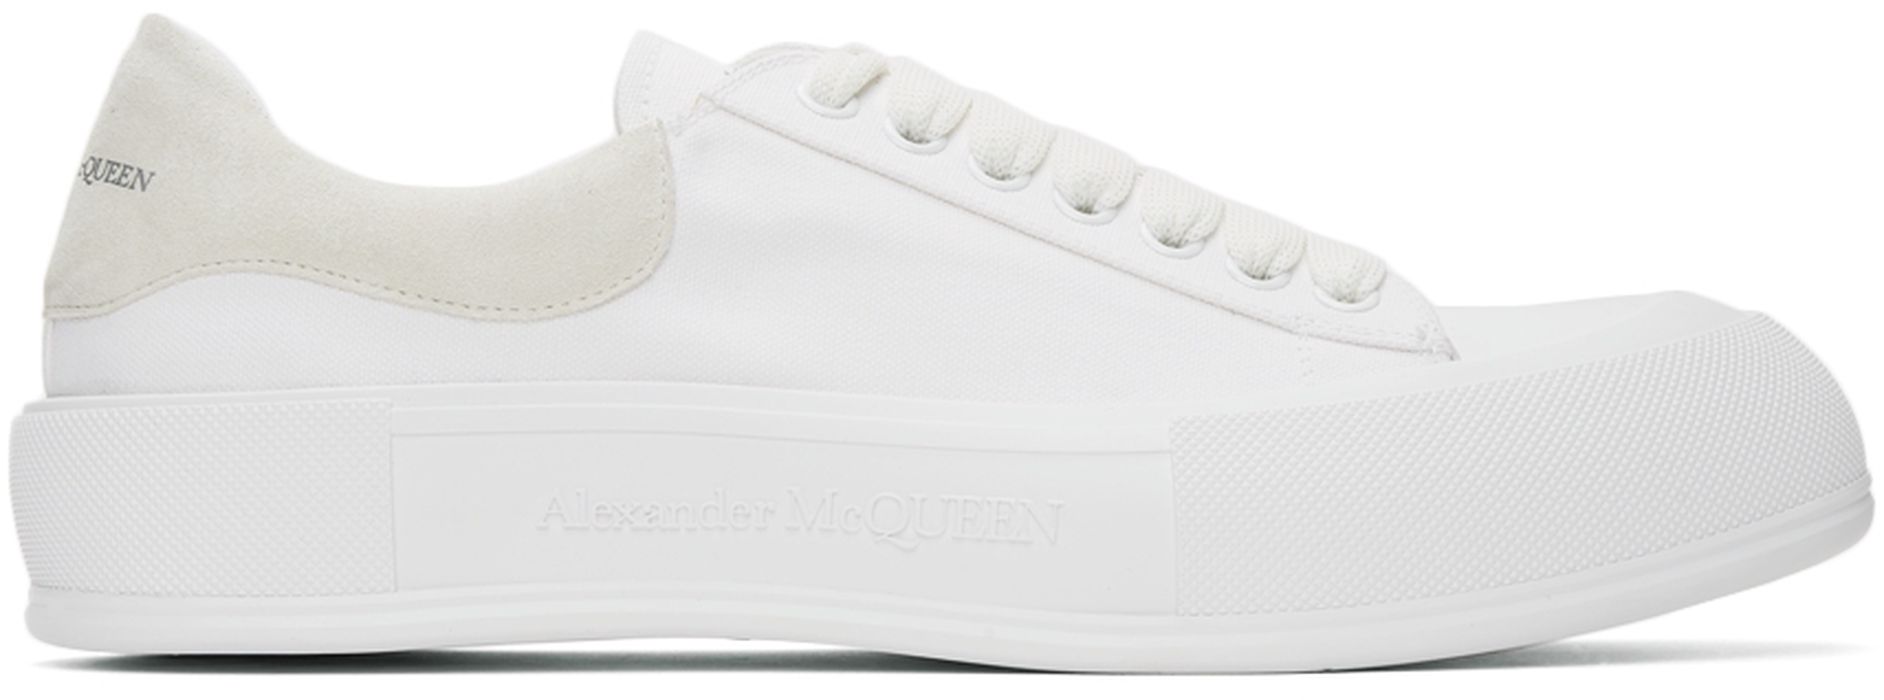 Alexander McQueen White Deck Lace-Up Plimsoll